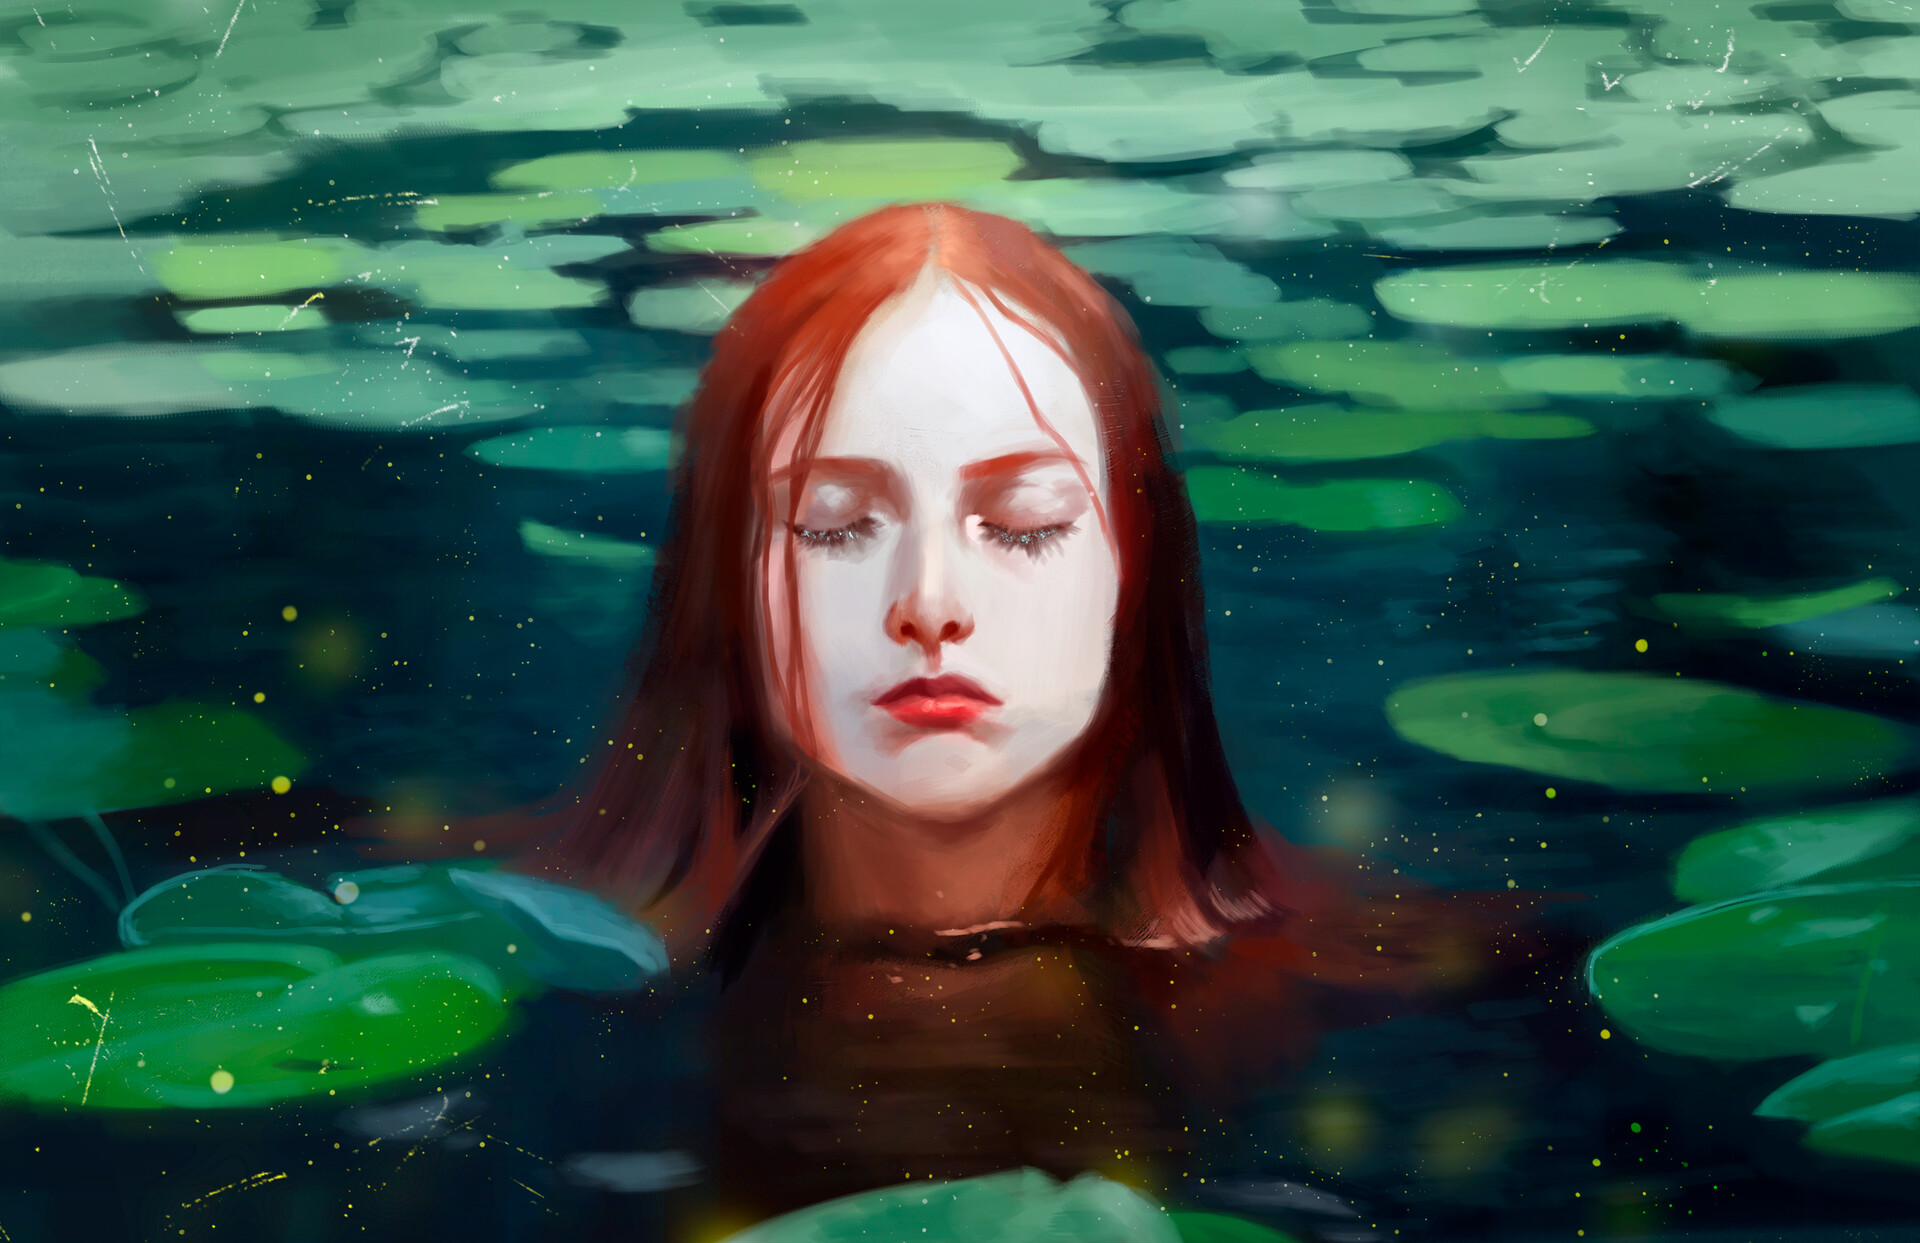 Emma Ronkainen Artwork Lake Young Woman Redhead Digital Painting Closed Eyes Closed Mouth Wet Hair W 1920x1243